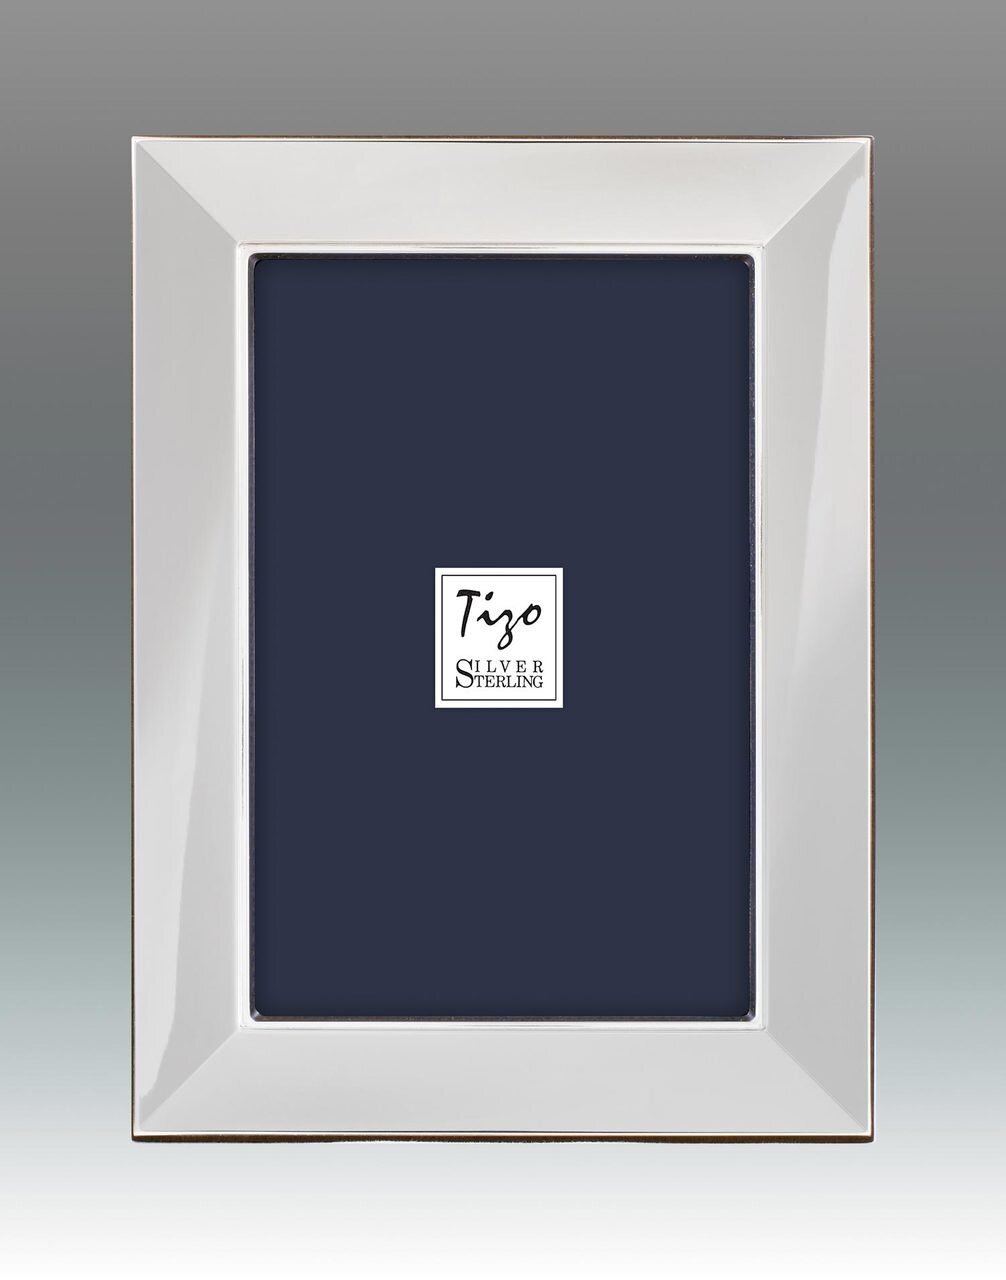 Tizo Empires 5 x 7 Inch Sterling Silver Picture Frame